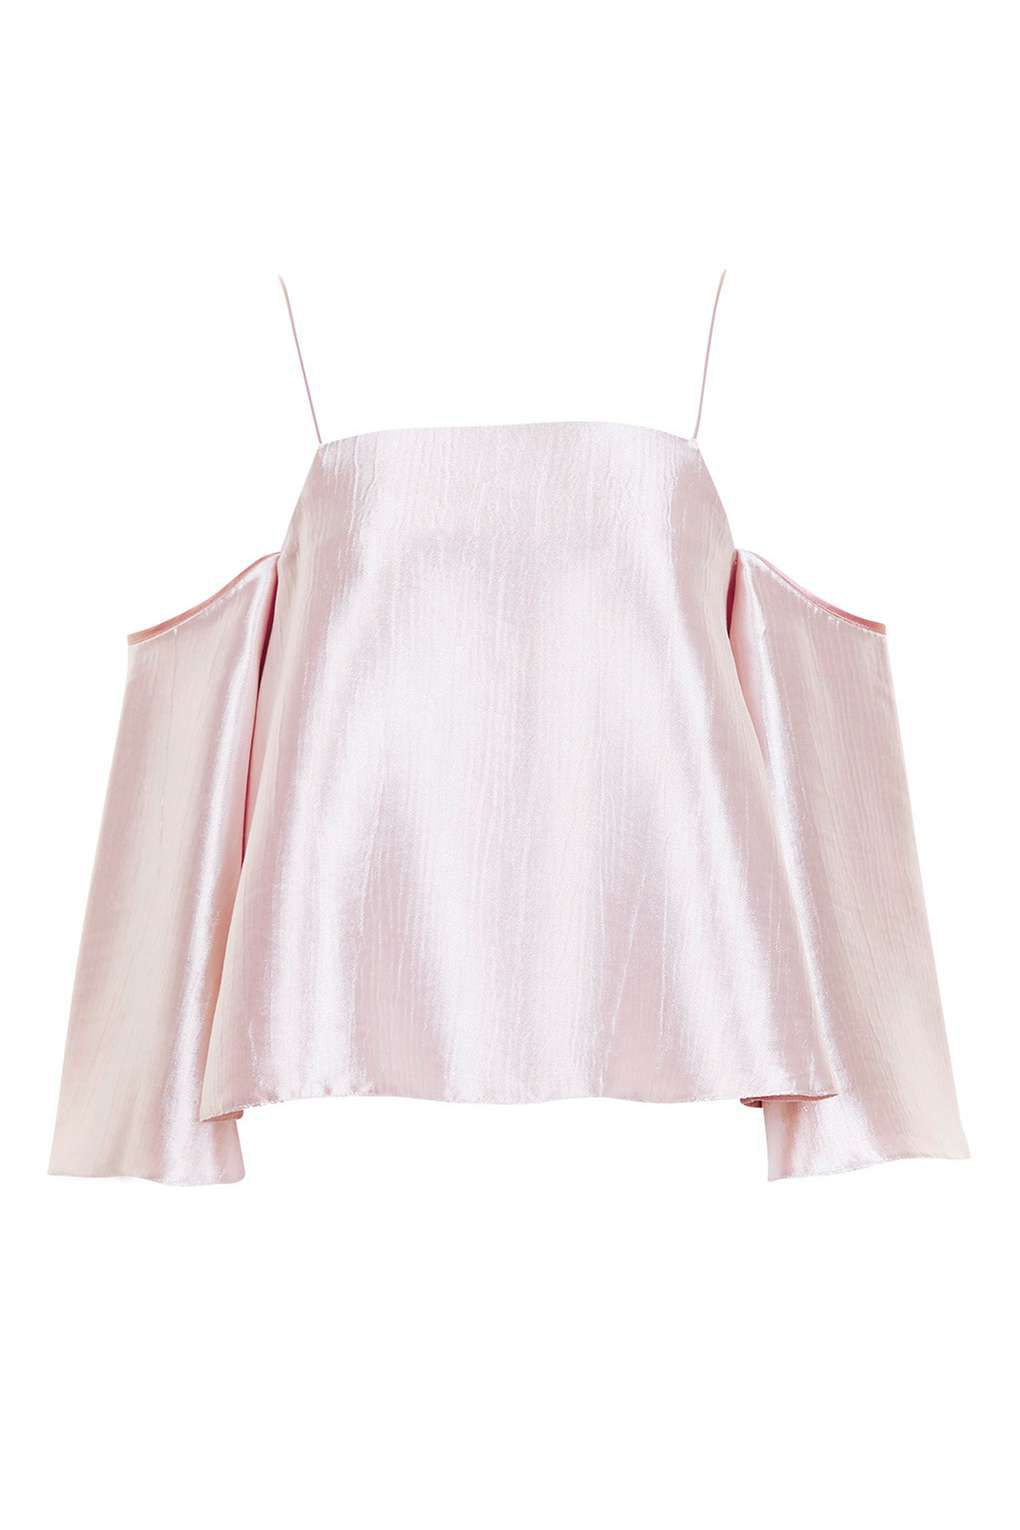 Flat image of pink cut-out shoulder blouse.